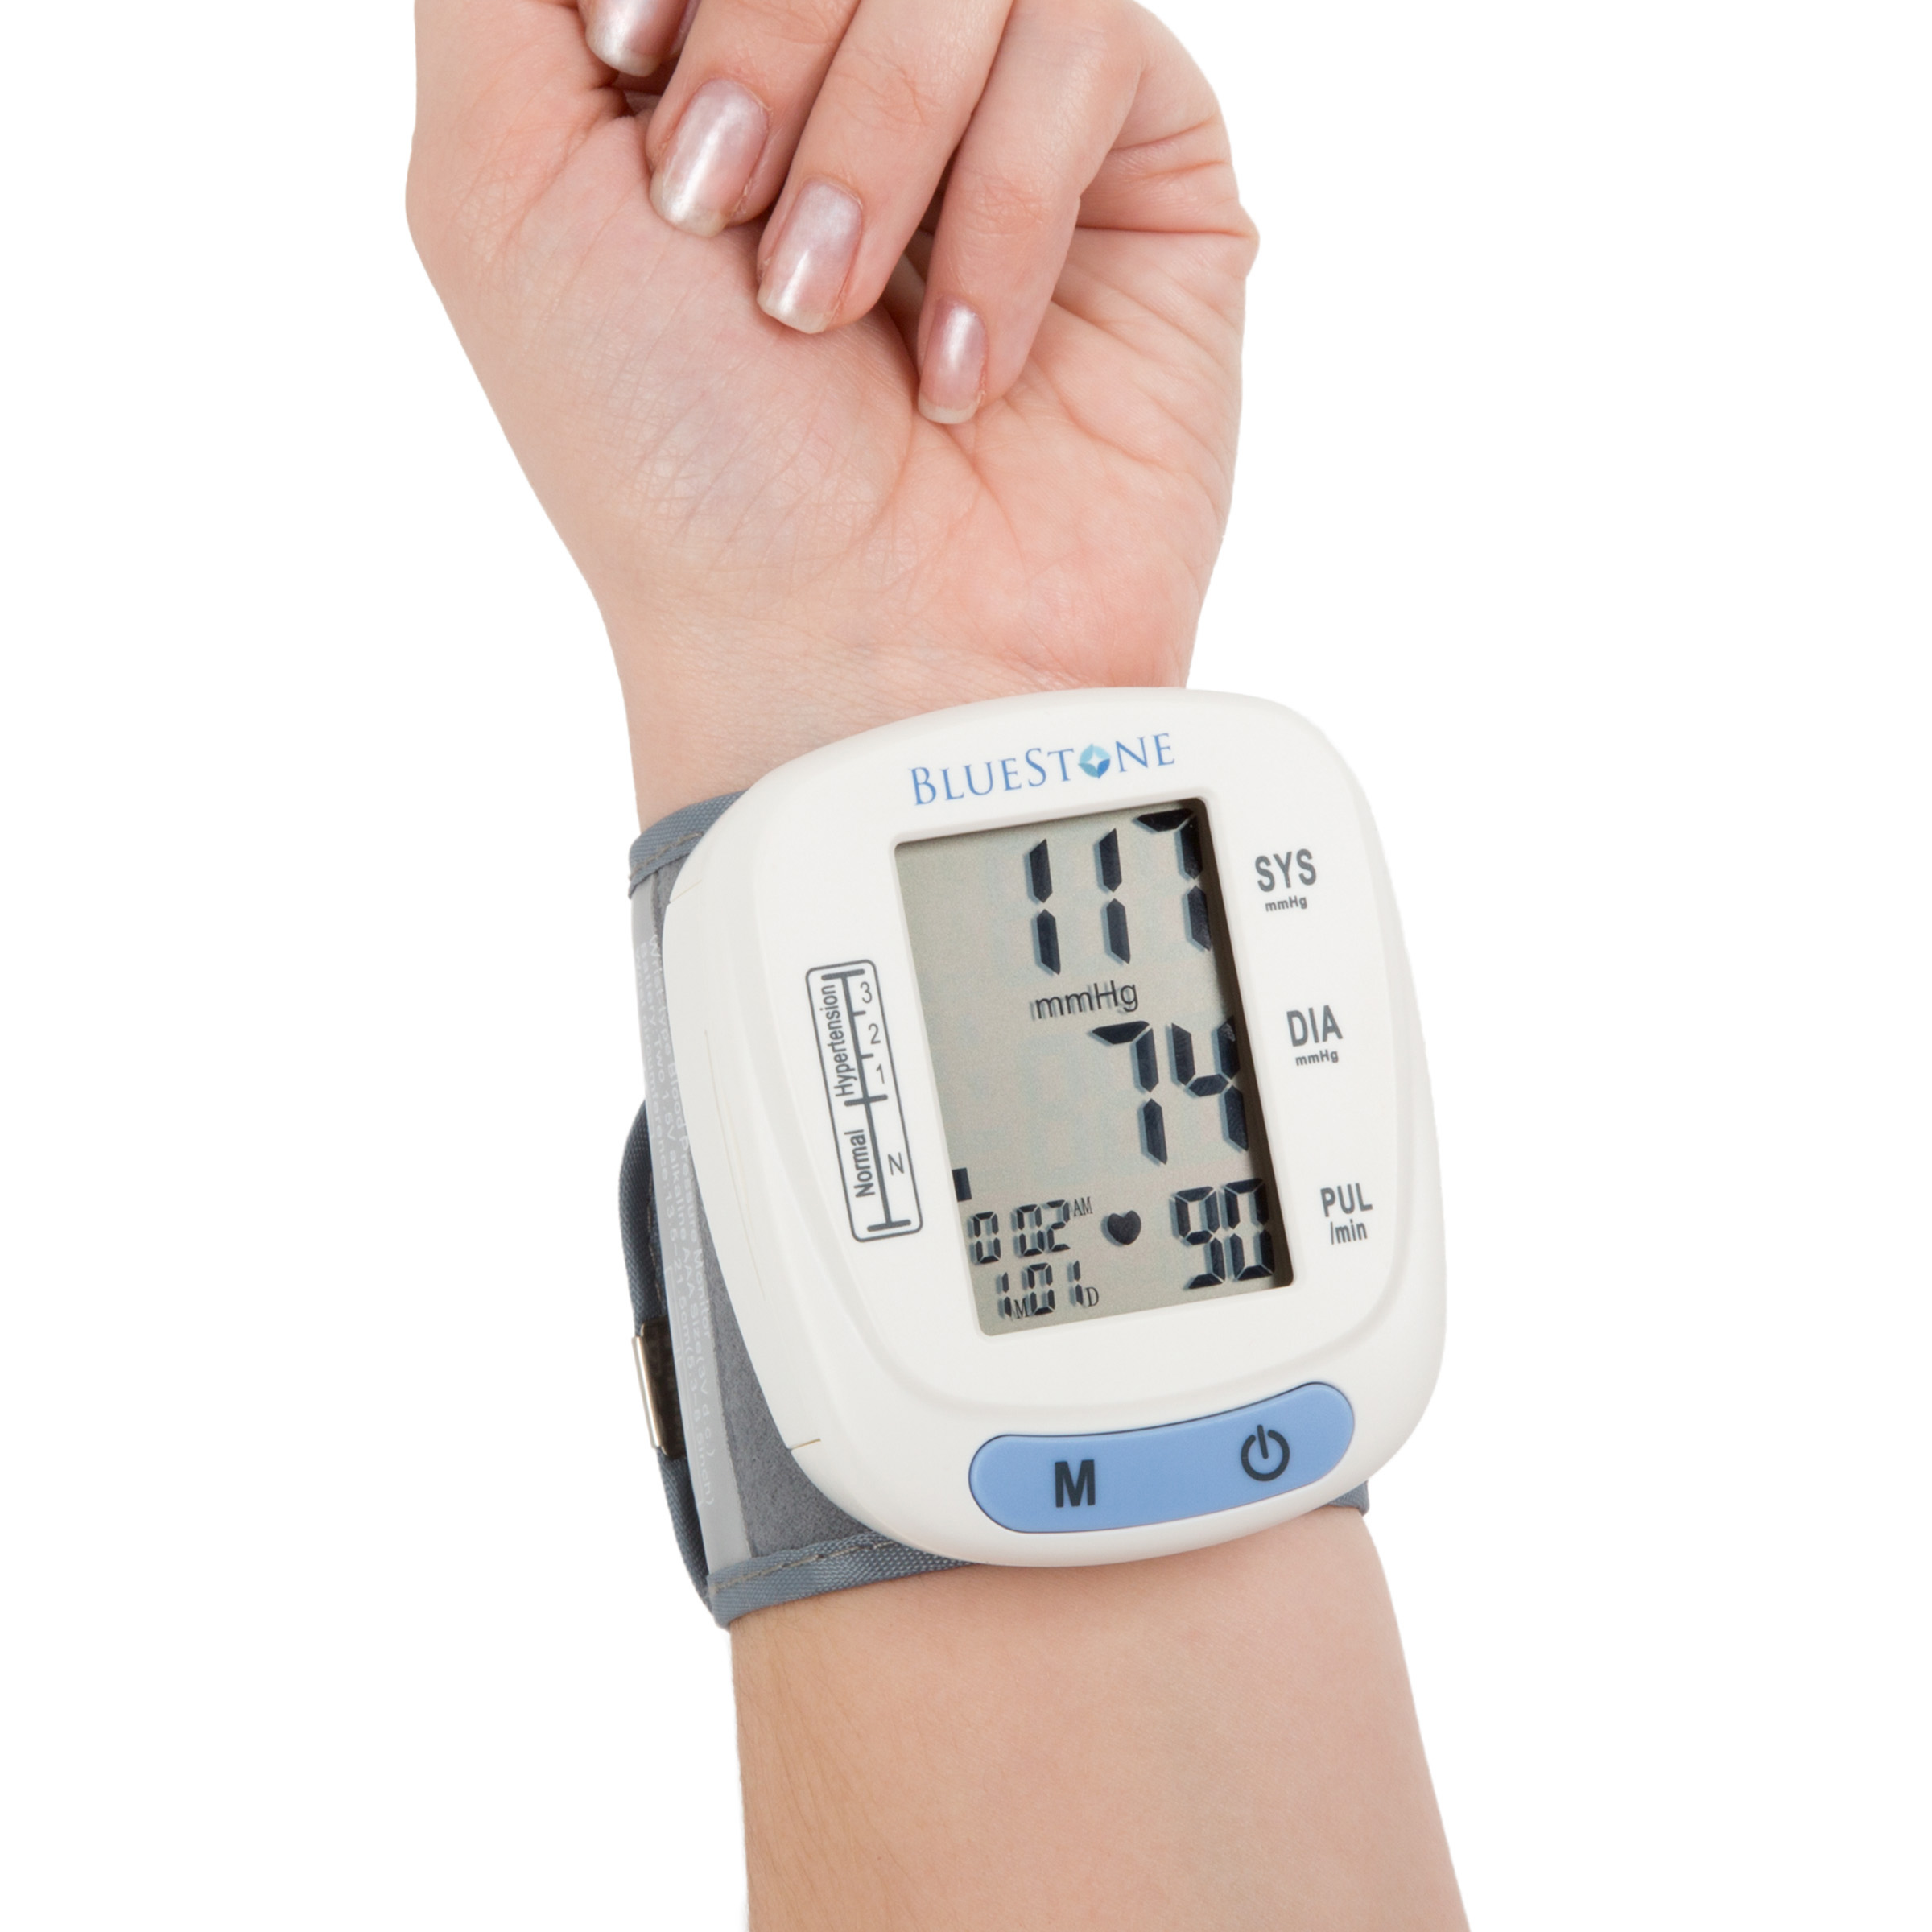 Blood Pressure Monitor With Heart Rate - Automatic Wrist Cuff Blood Pressure Machine With LCD Display Memory and Carrying Case by Bluestone - image 1 of 7